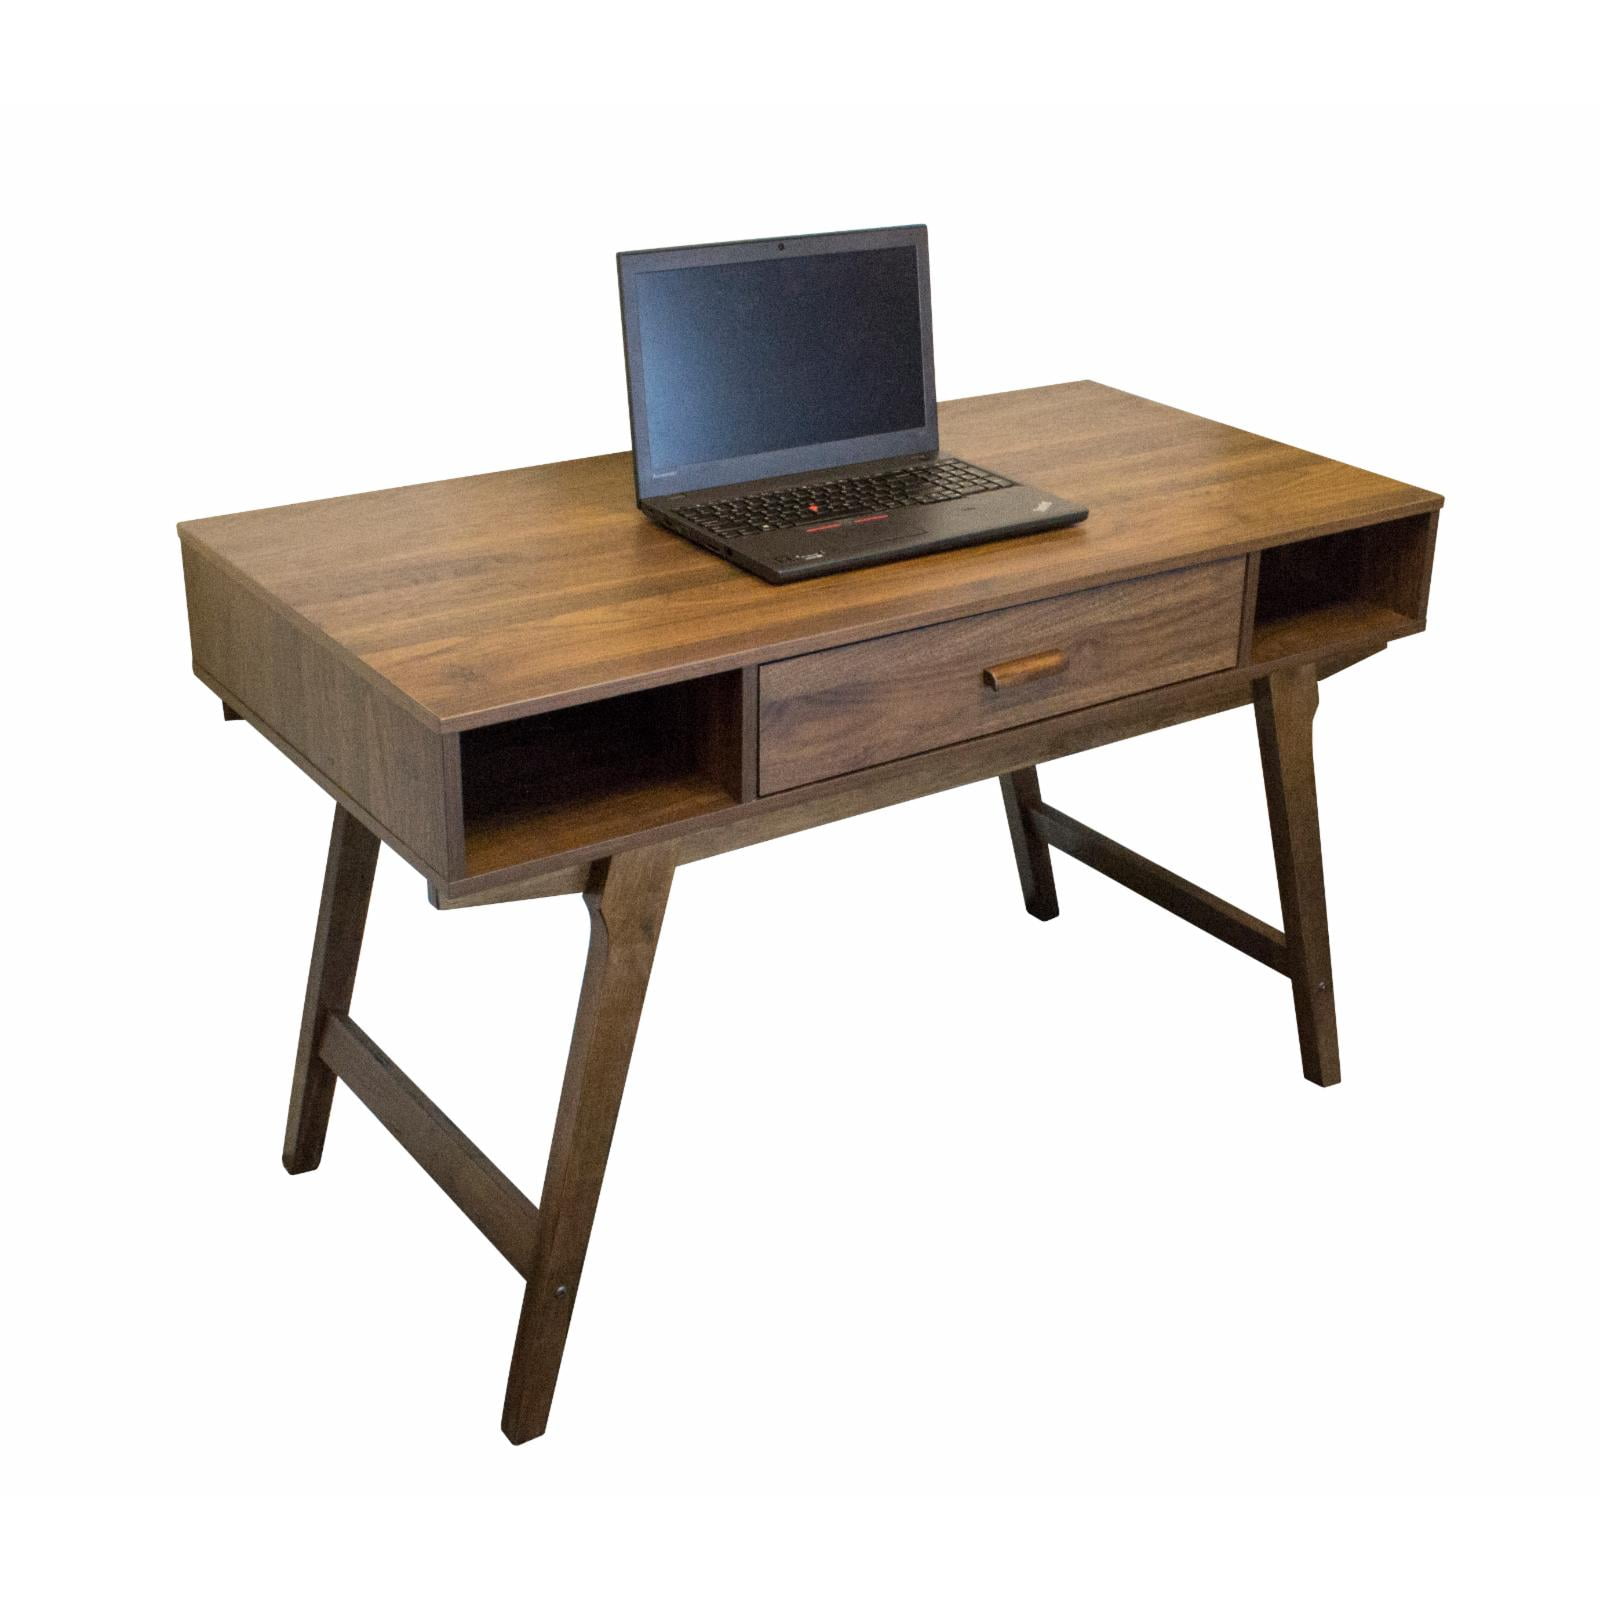 LatestLuxury 30 x 47.25 x 23.5 in. OS Home & Office Mid Century Desk with One Drawer & Sturdy Legs